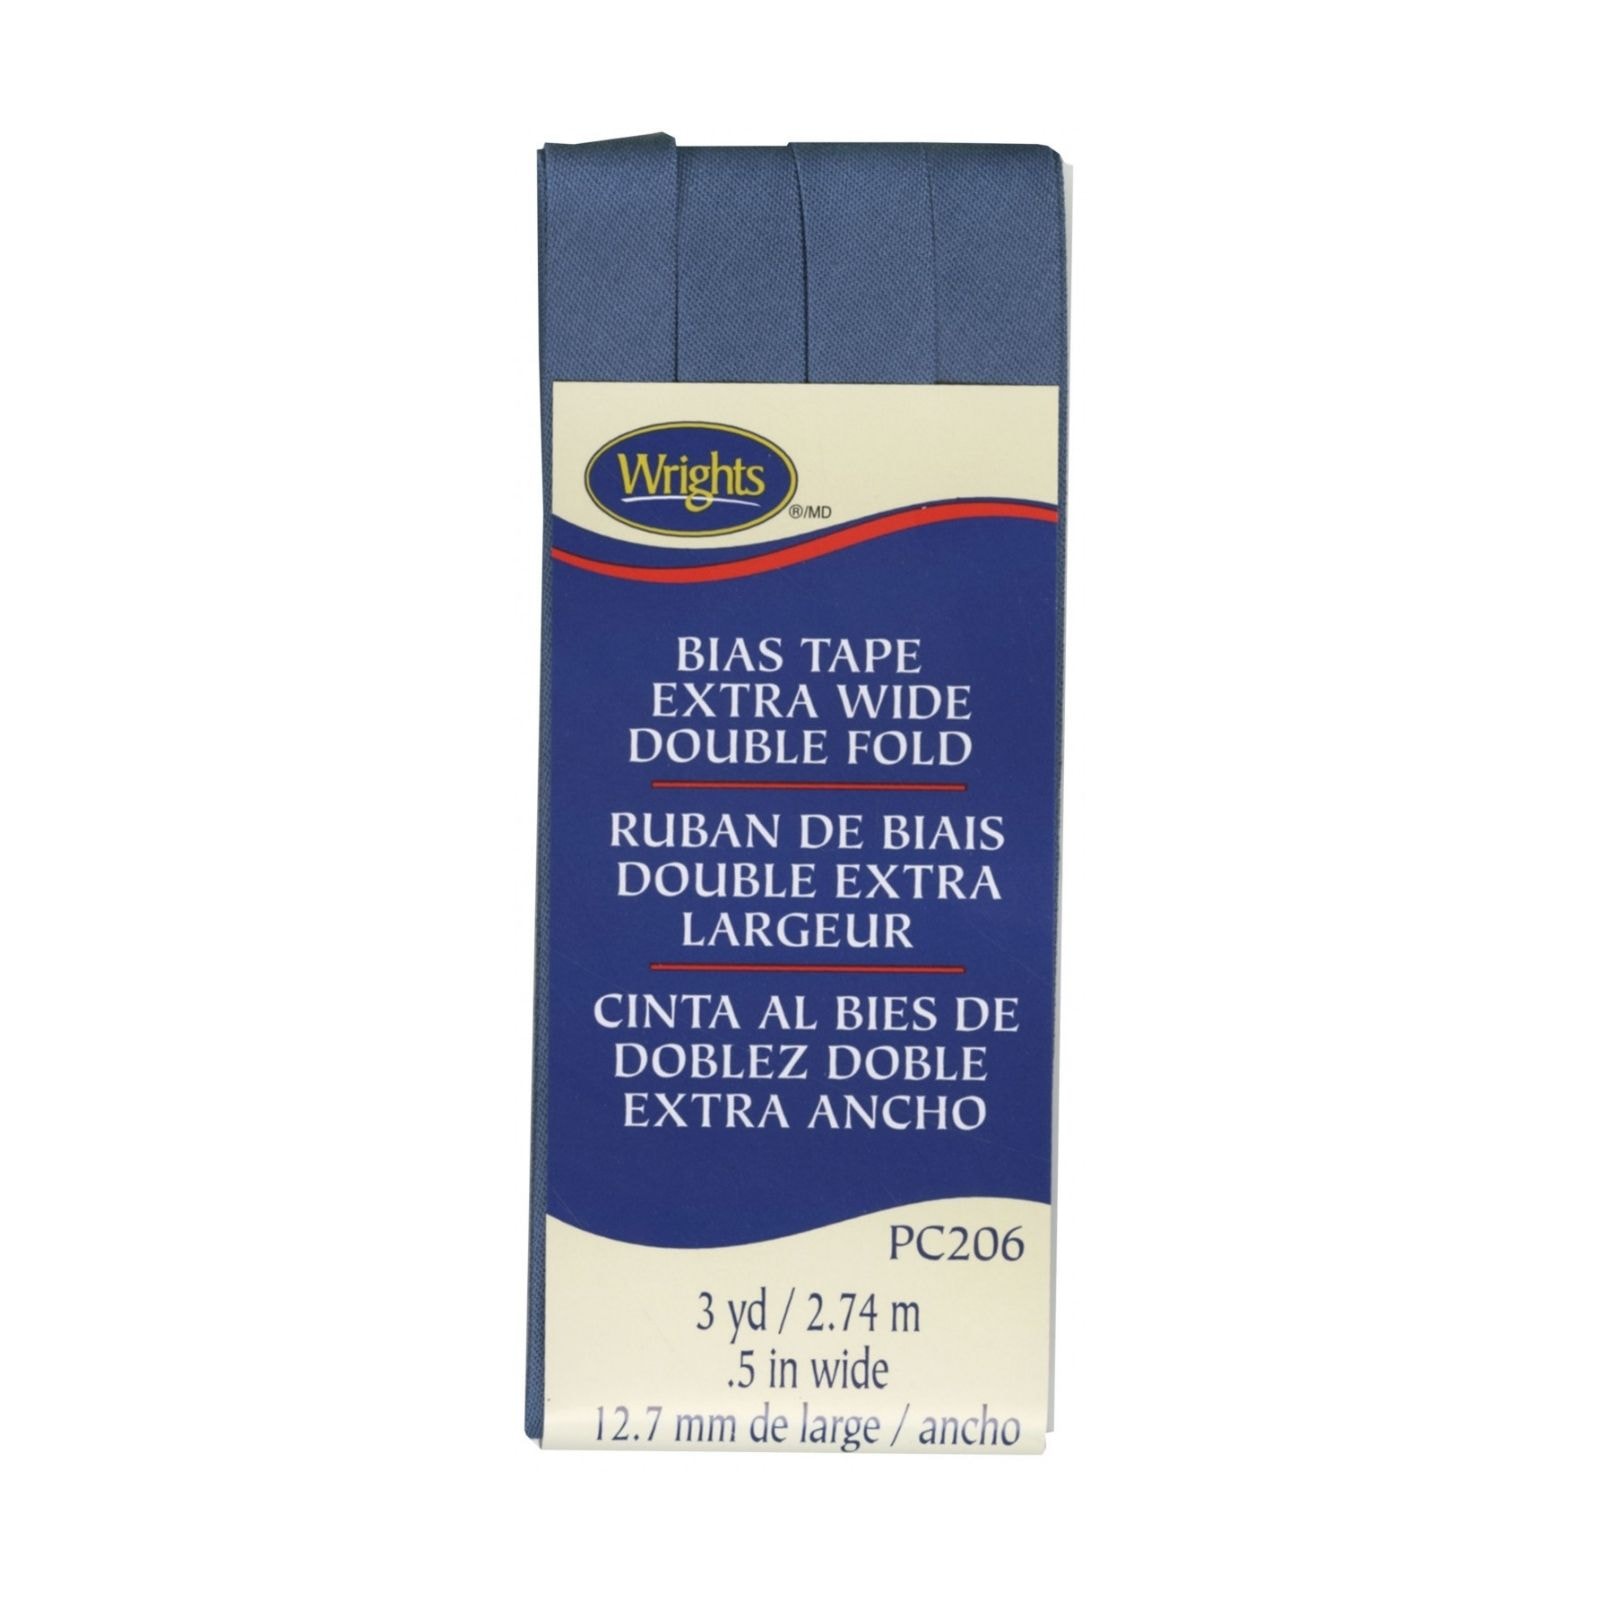 Wrights Extra Wide Double Fold Bias Tape - Stone Blue